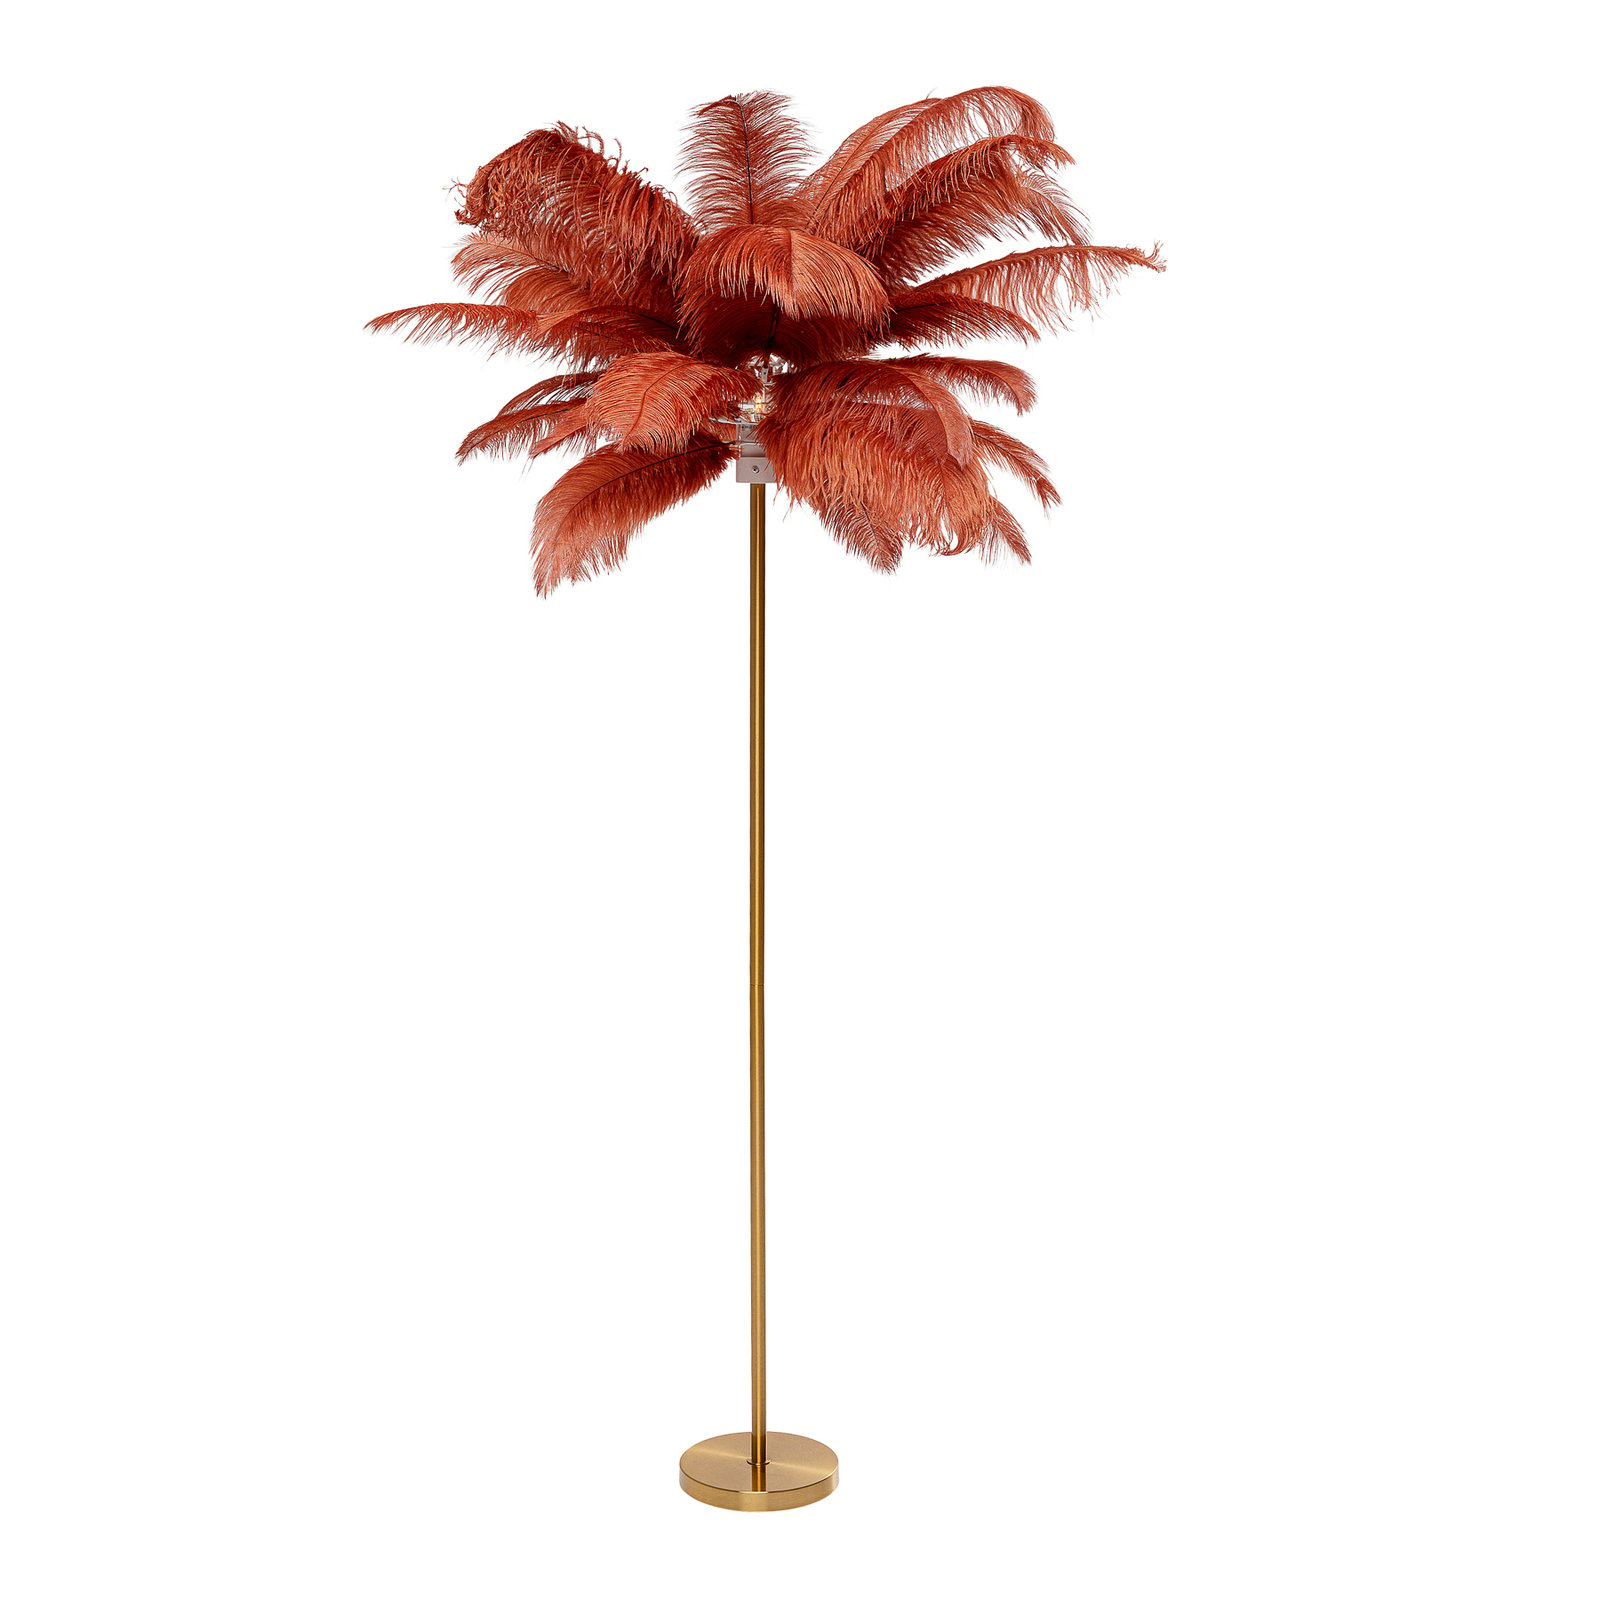 KARE Feather Palm lampe sur pied plumes, rouille